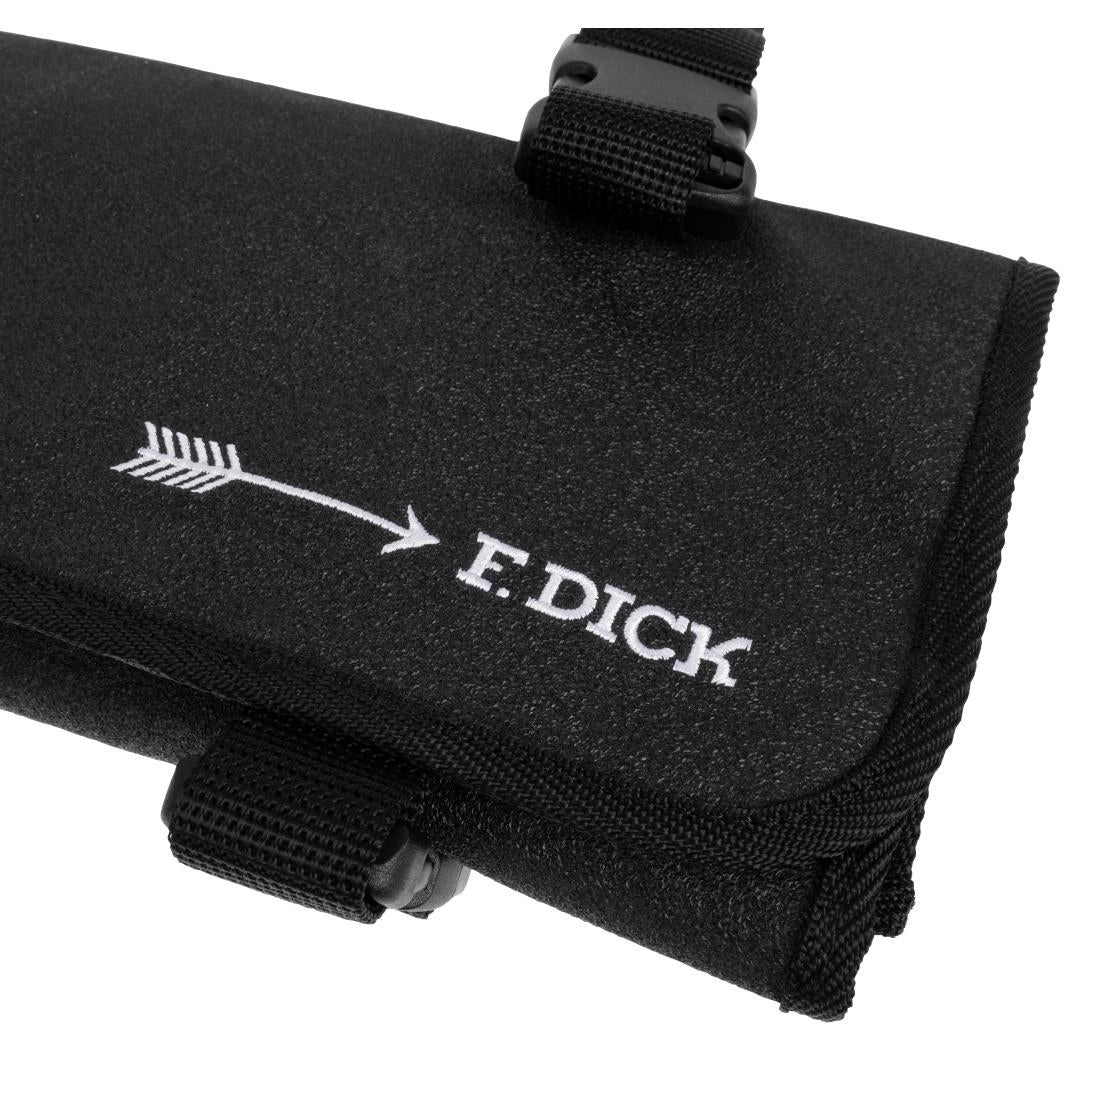 GD796 Dick Black Textile Roll Bag and Strap 11 Slots JD Catering Equipment Solutions Ltd